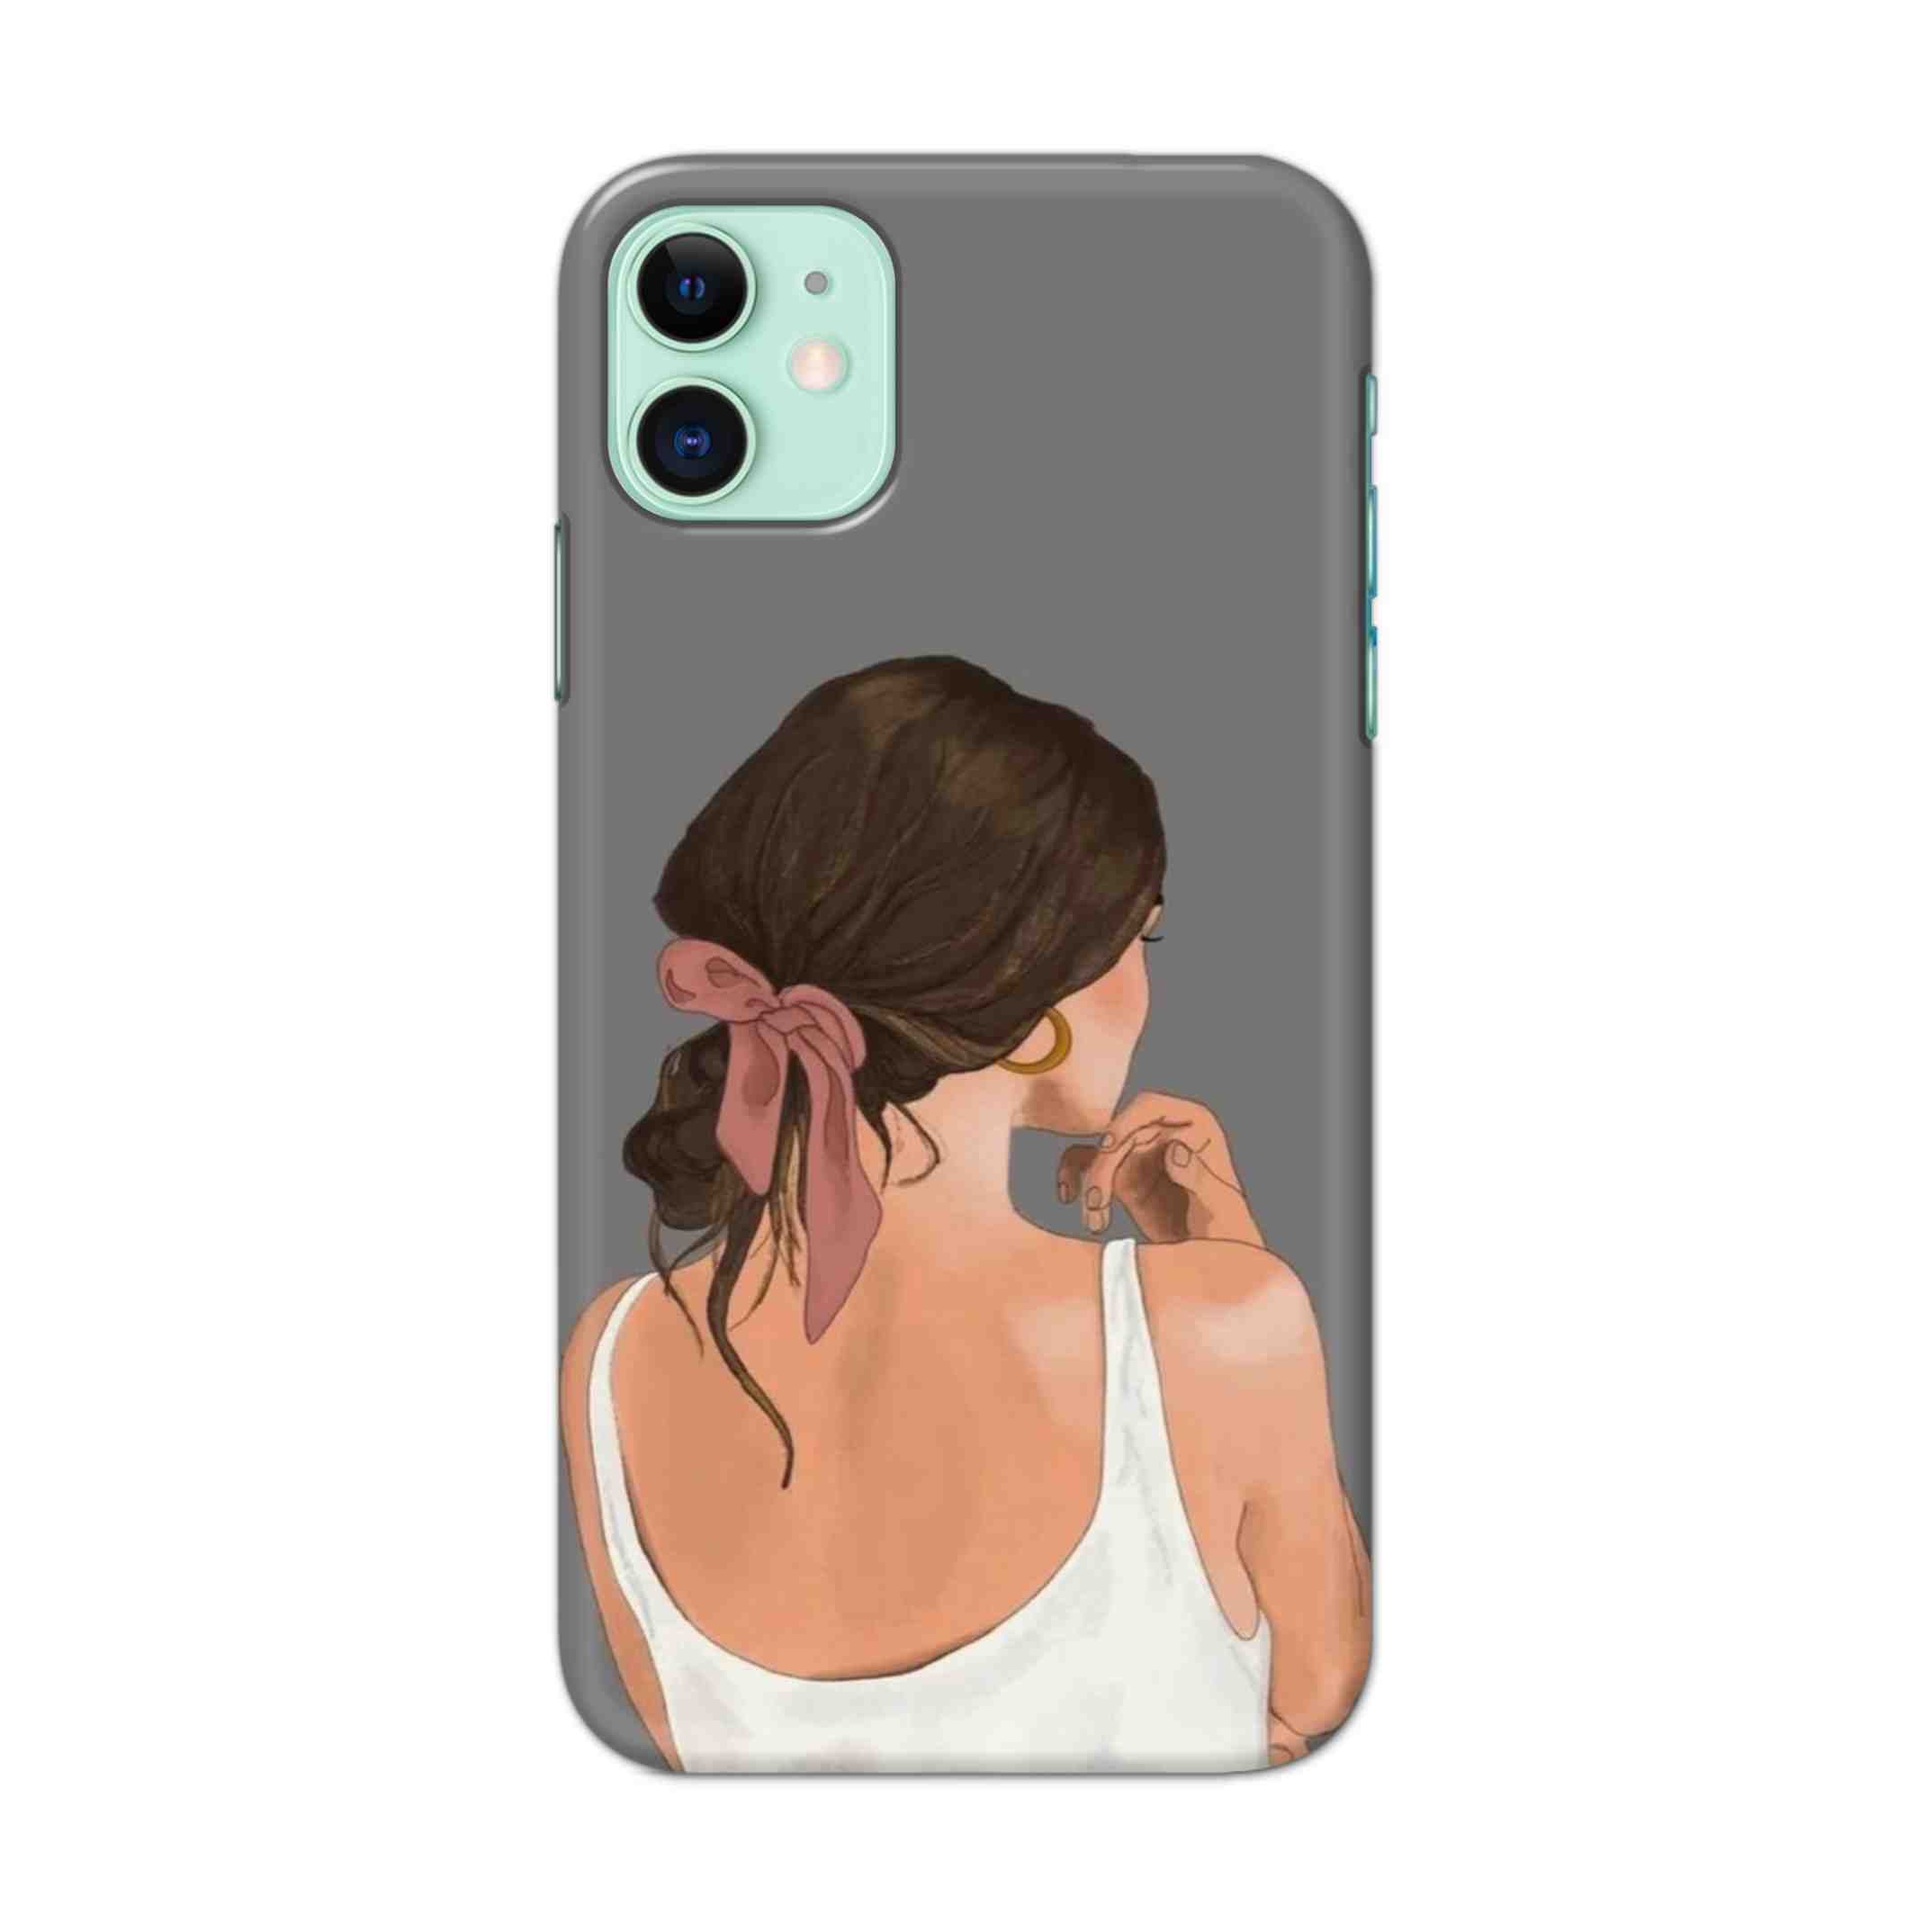 Buy Thinking Girl Hard Back Mobile Phone Case Cover For iPhone 11 Online